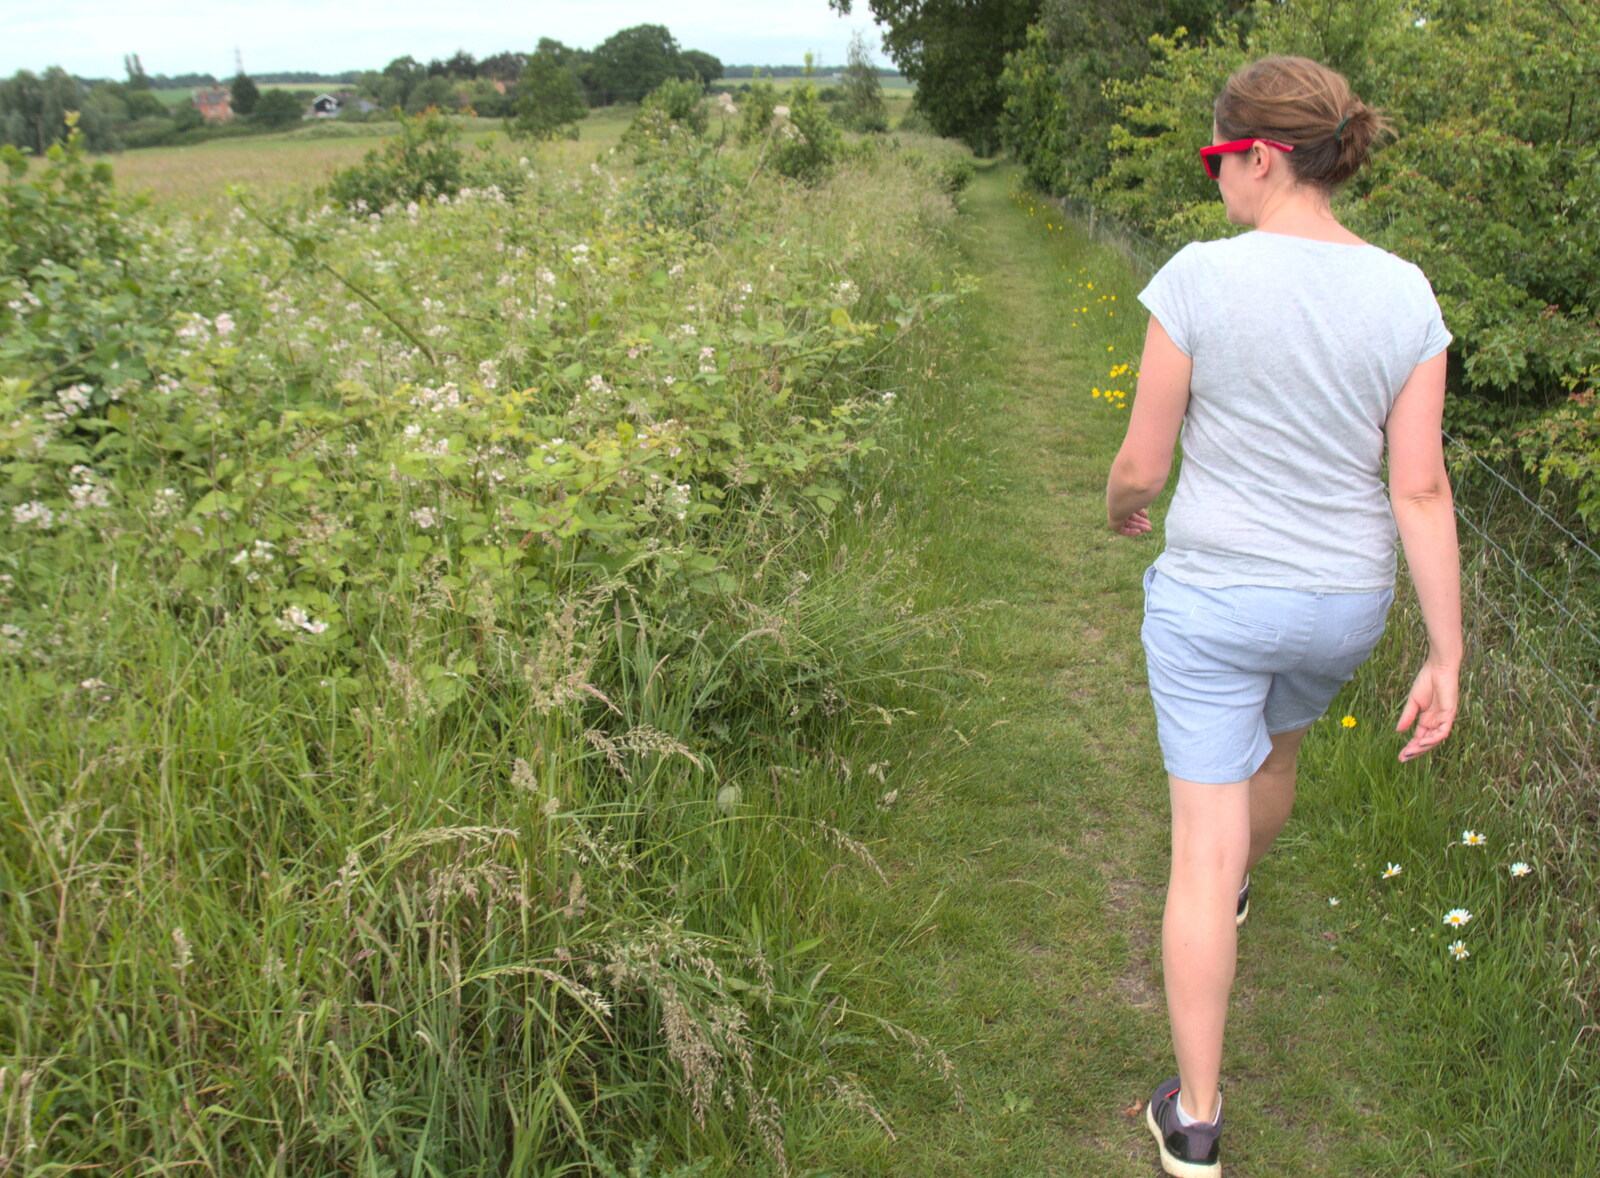 We walk around the fields from Lifehouse and Thorpe Hall Gardens, Thorpe-le-Soken, Essex - 11th June 2017